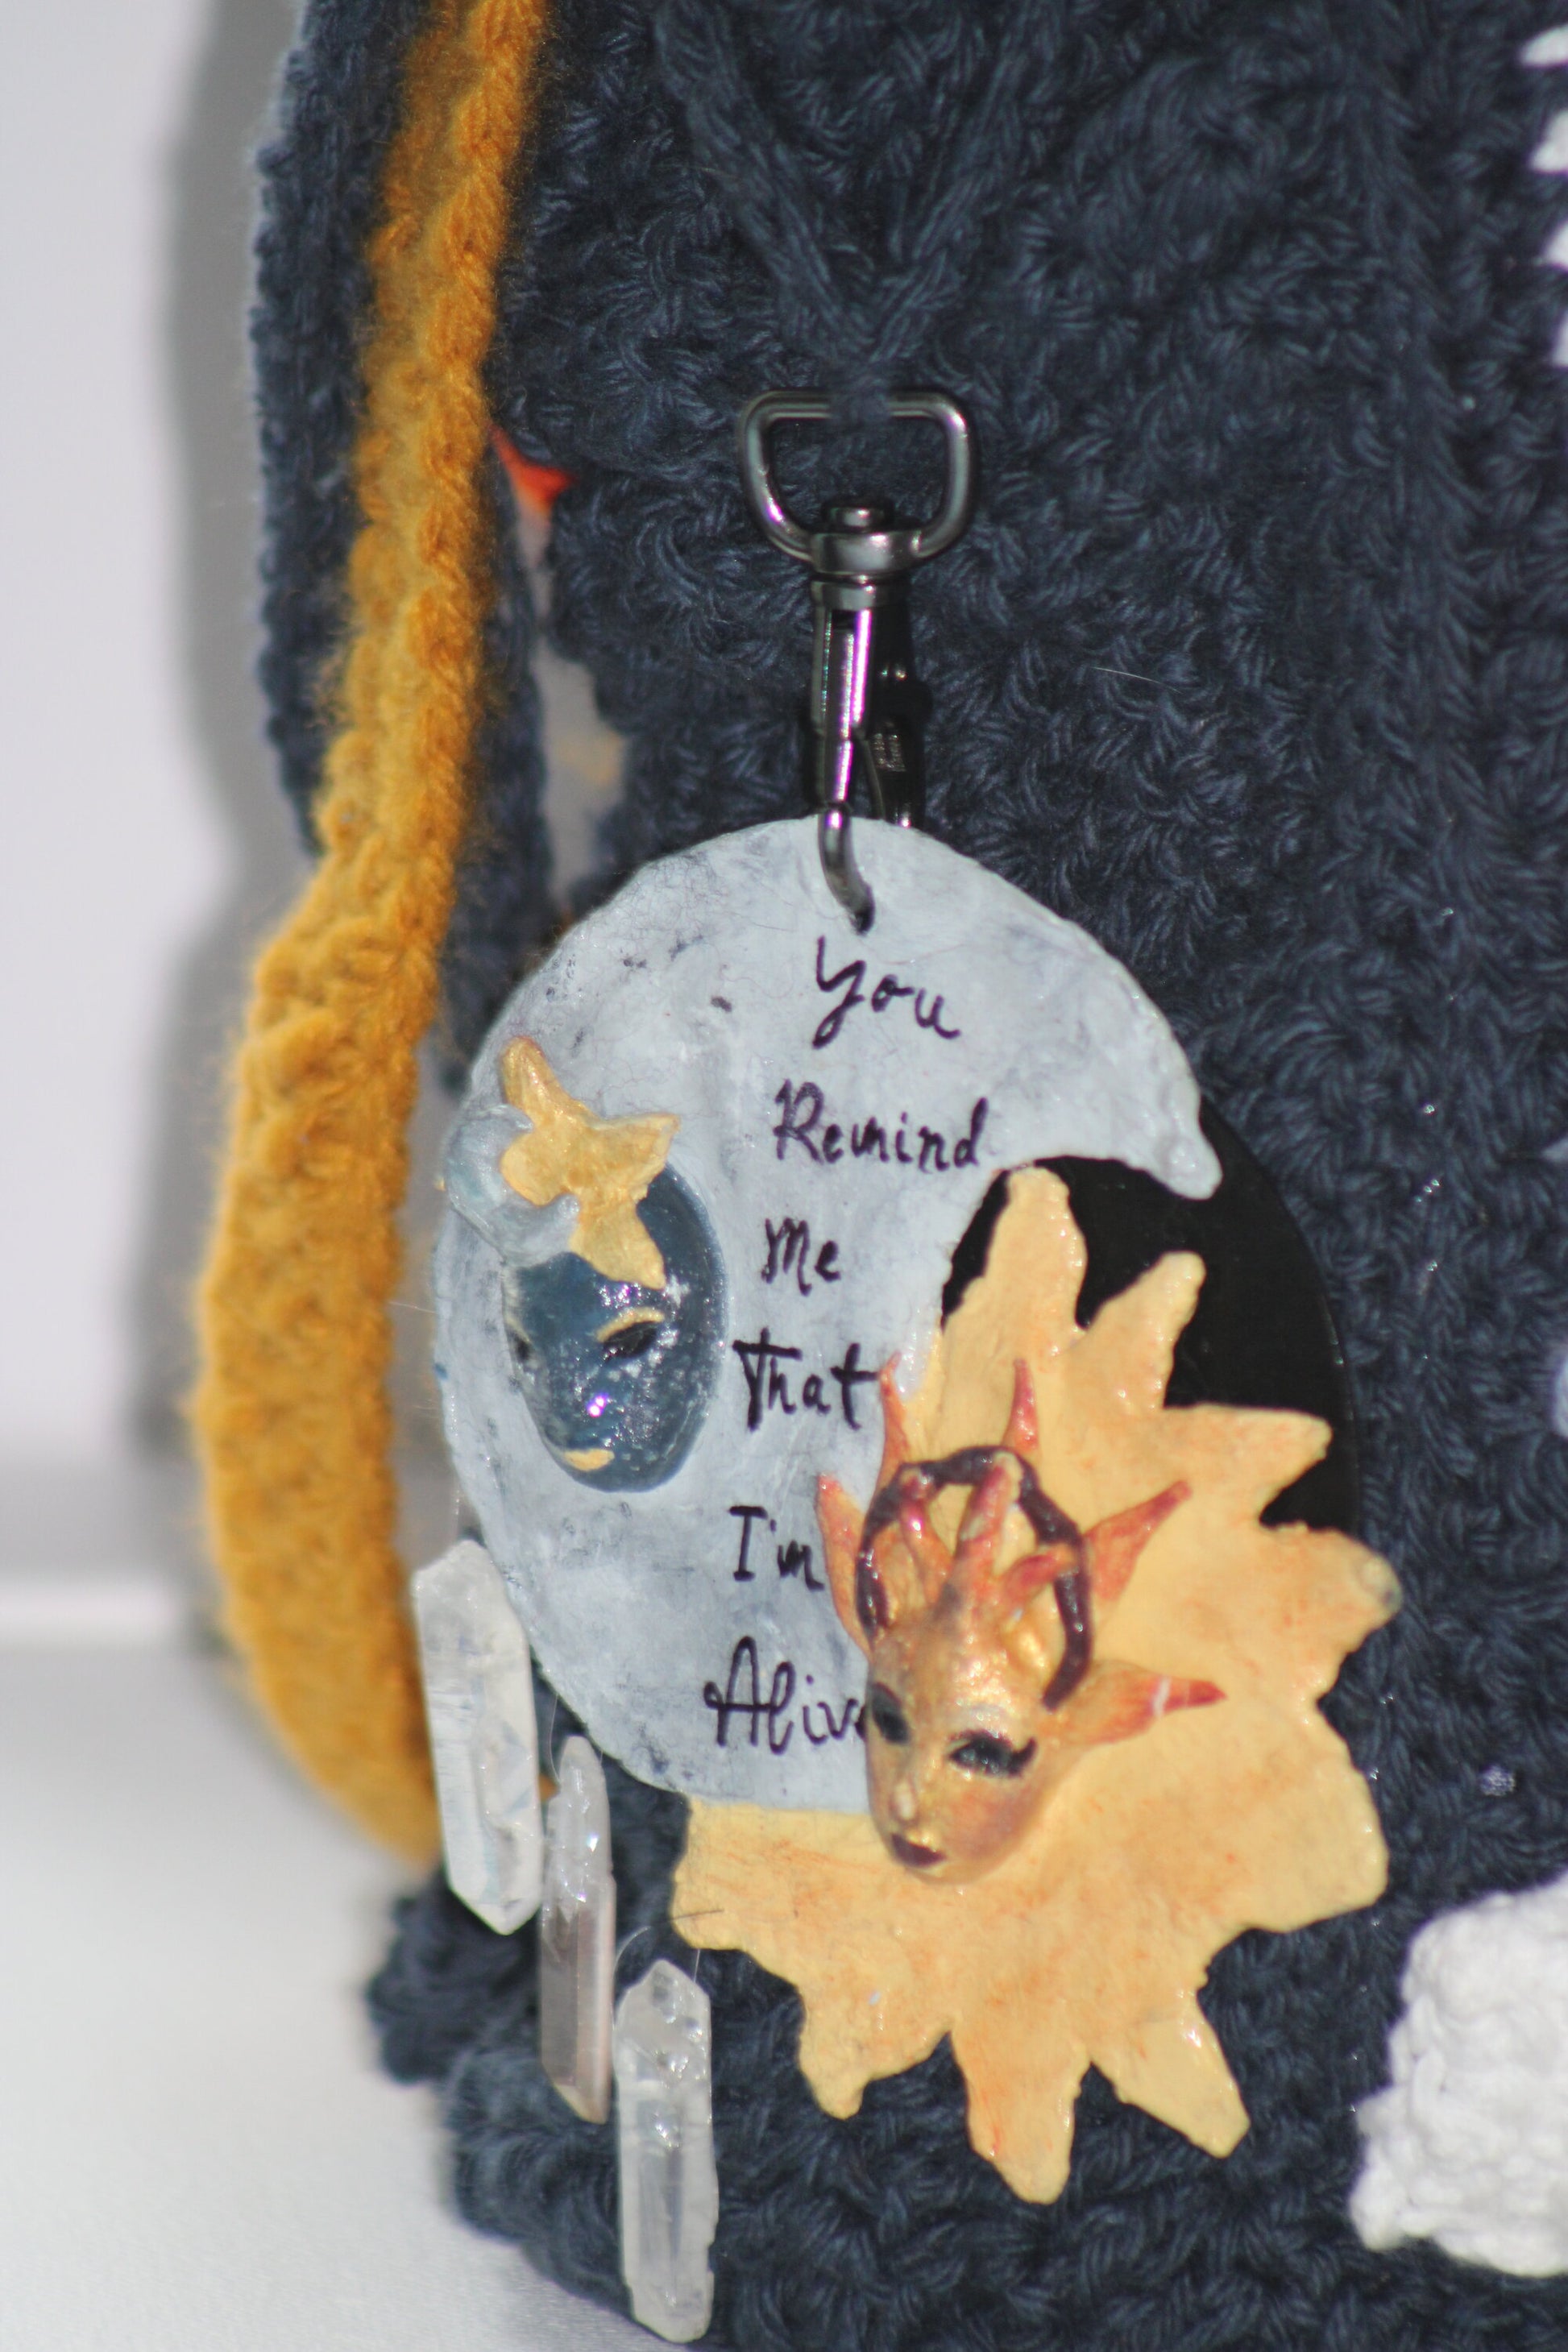 This handbag also has an attachable keychain on the side, which contains a blue male moon and star masquerade mask and a yellow female sun masquerade mask. There are also three crystals hanging to the bottom left and the quote "You Remind Me That I'm Alive" written between the two masks. 